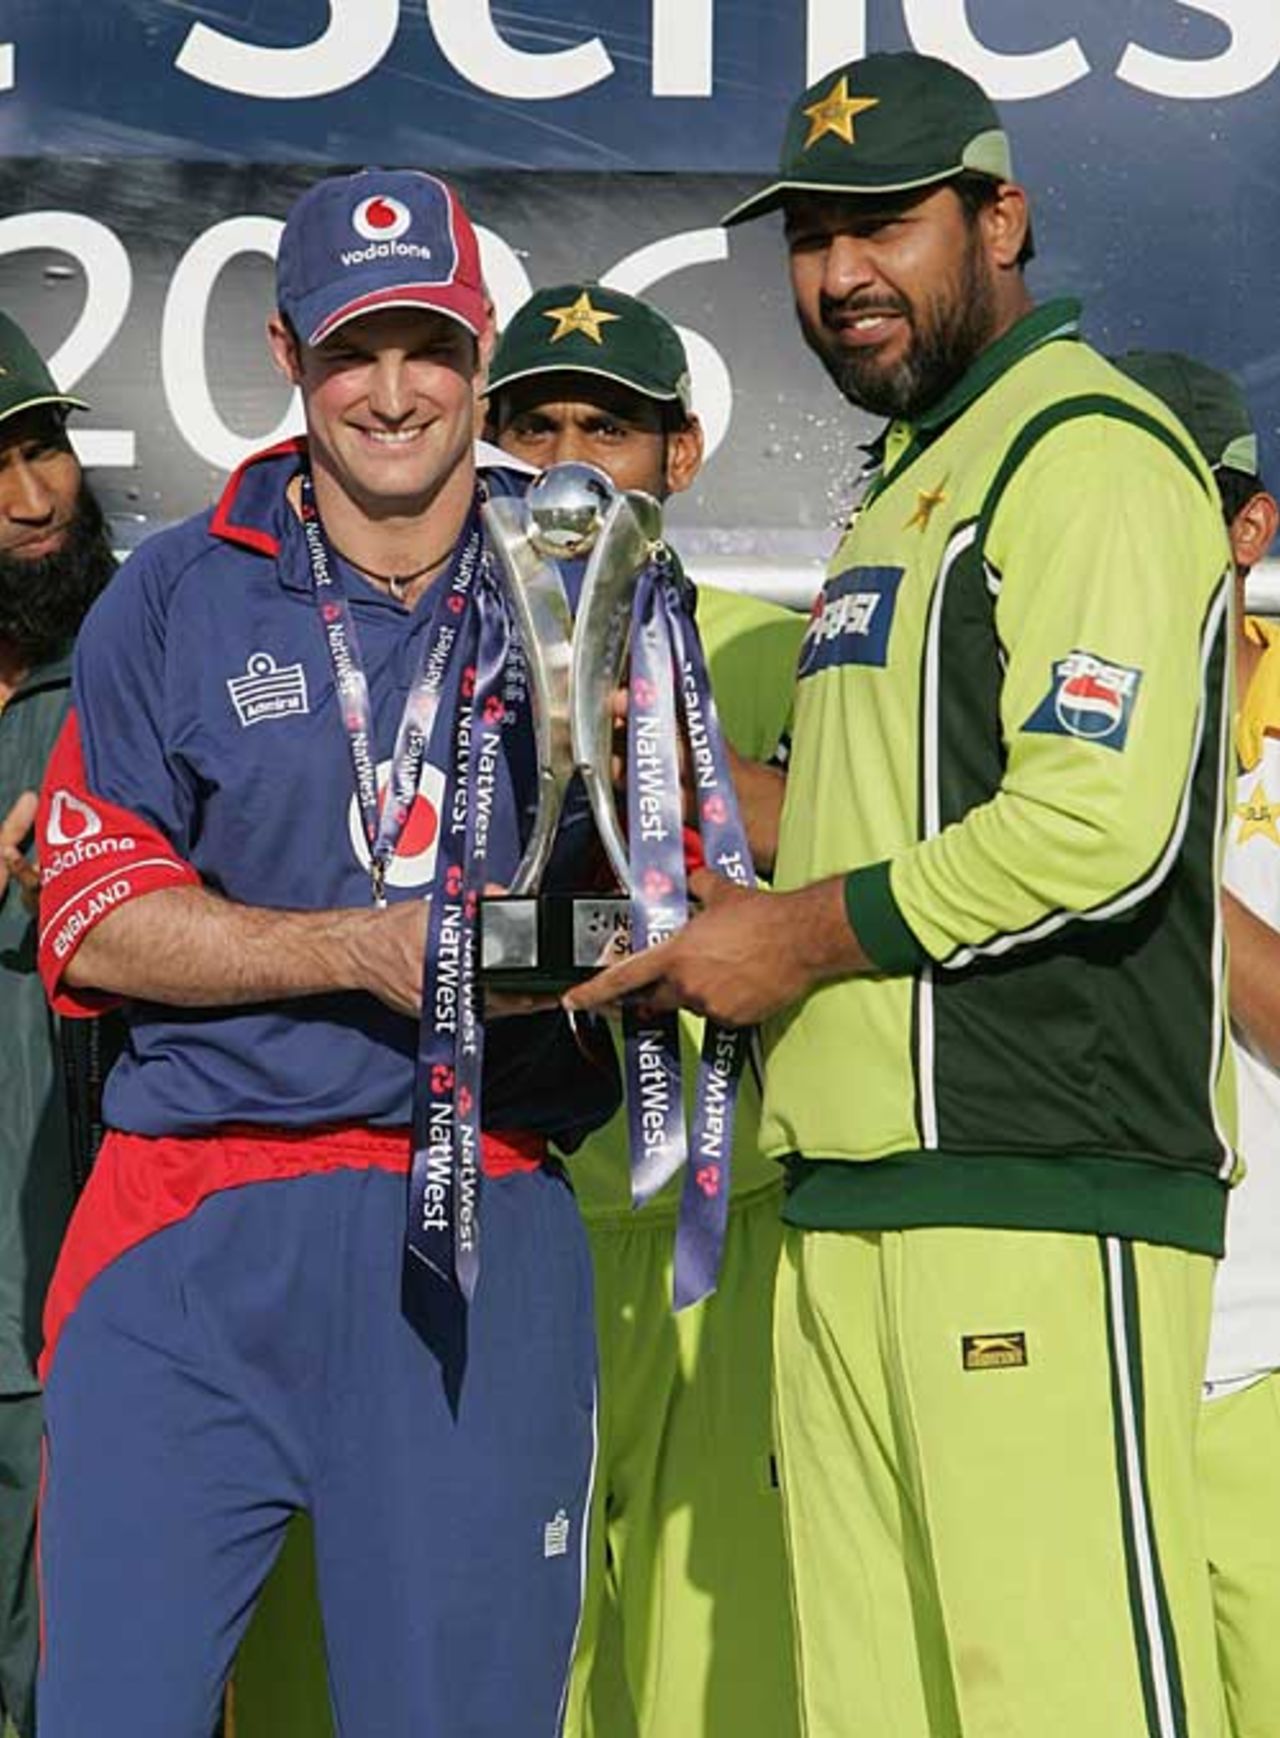 Andrew Strauss and Inzamam-ul-Haq with the Natwest Trophy, England v Pakistan, 5th ODI, Edgbaston, September 10, 2006